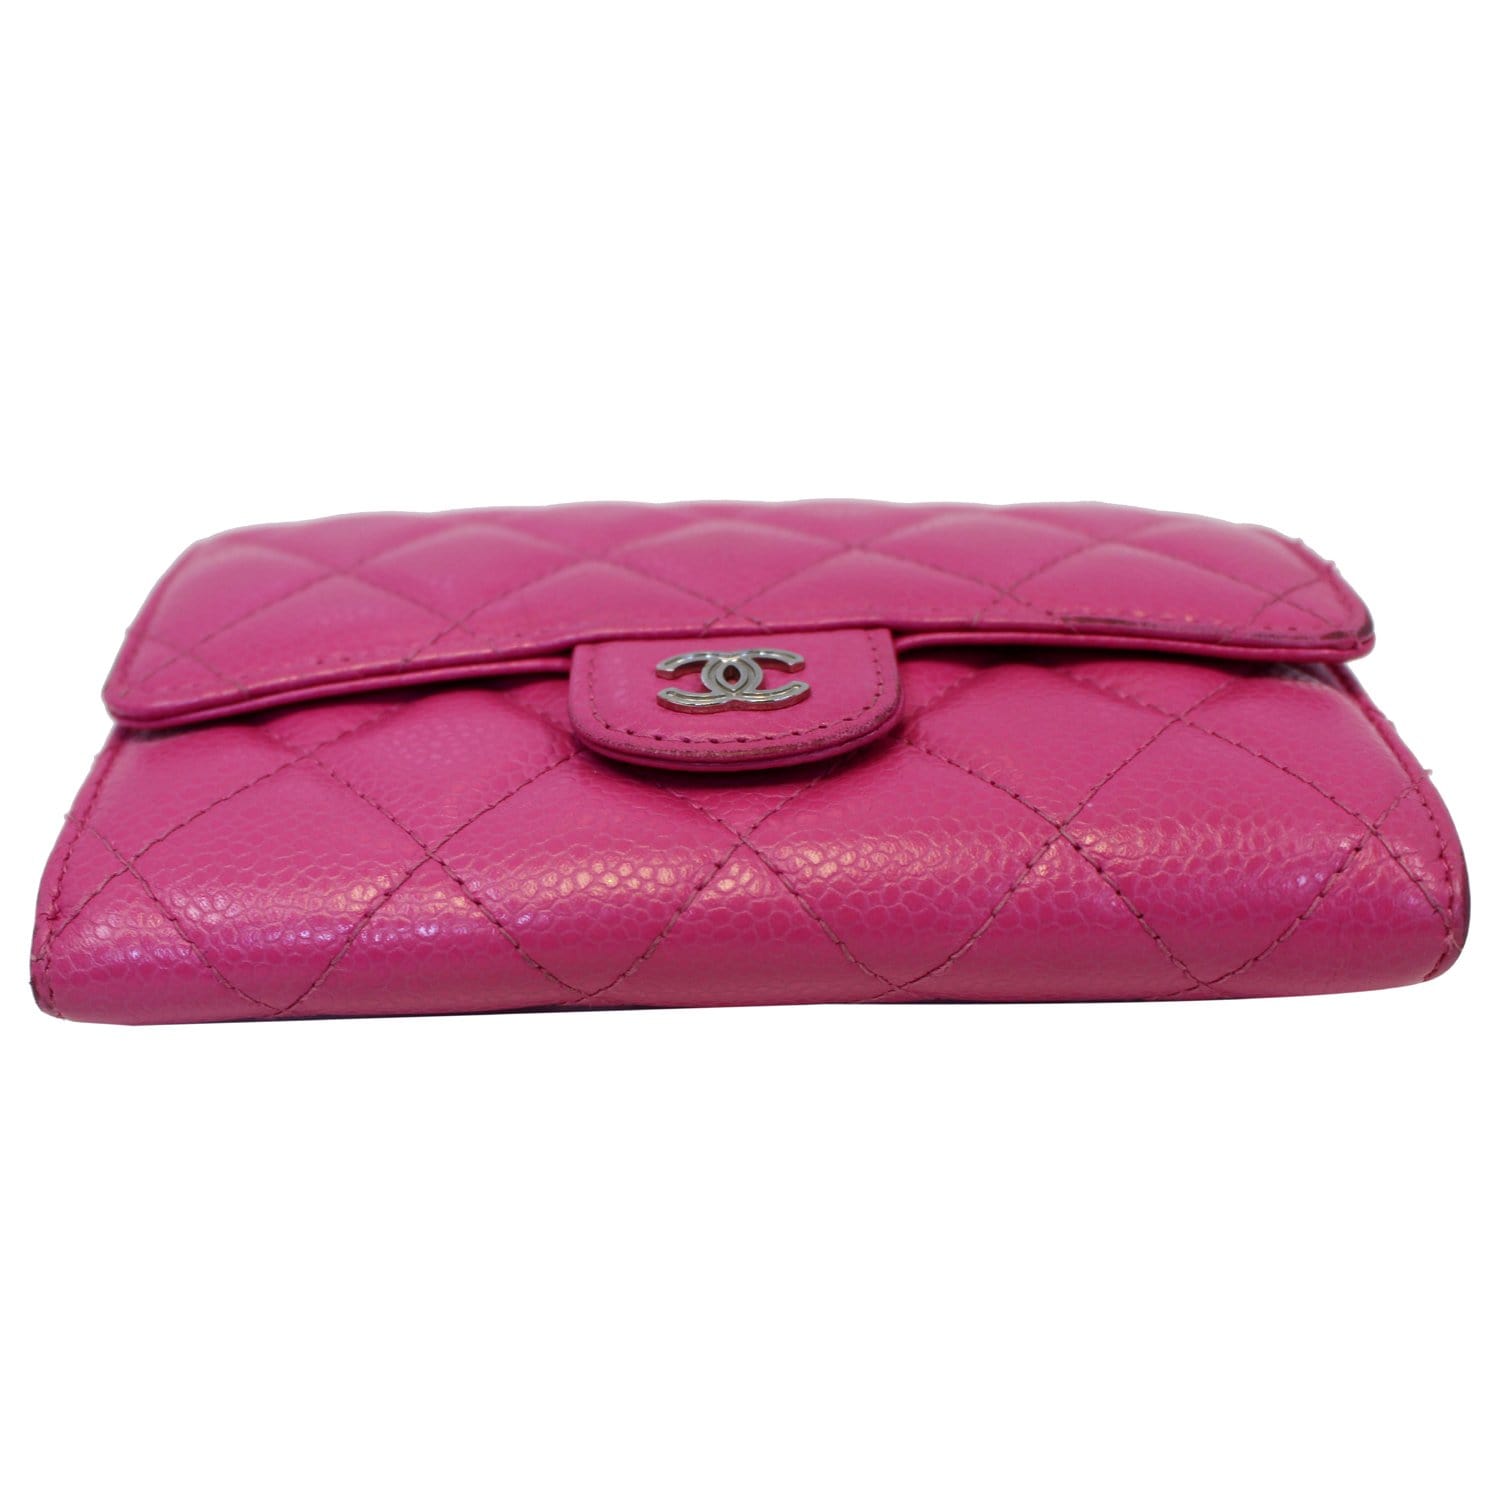 Chanel Classic Small Compact Wallet Iridescent Pink Large CC